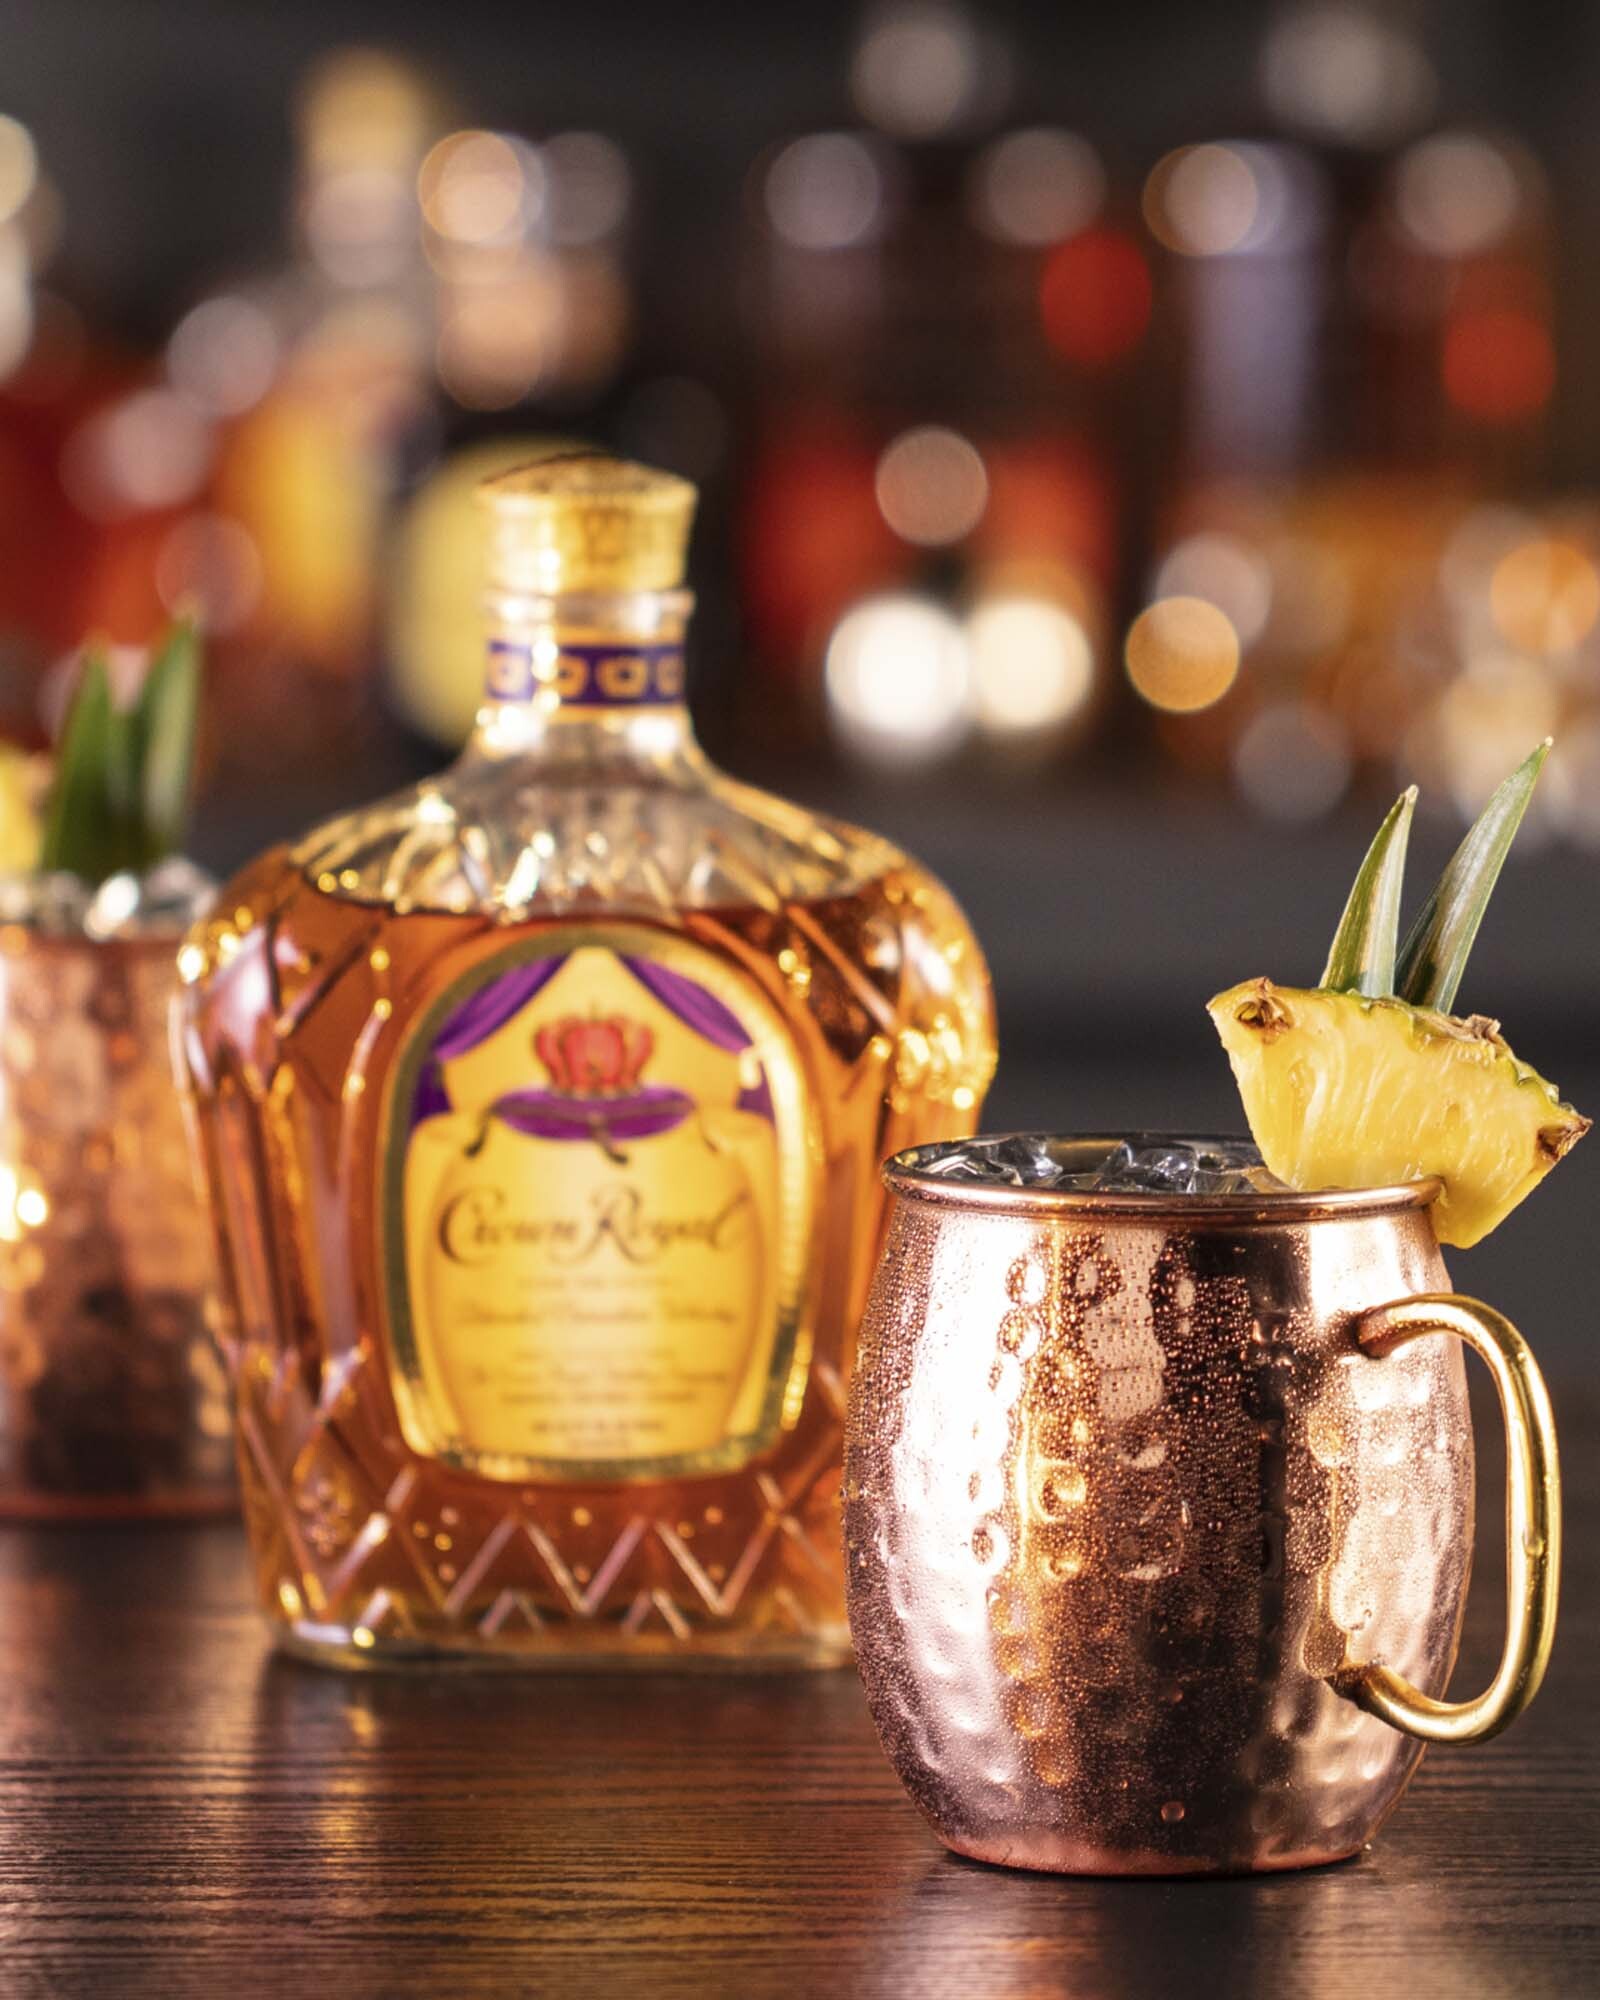 Is Crown Royal Pineapple Your Ultimate Guide to the Latest Release